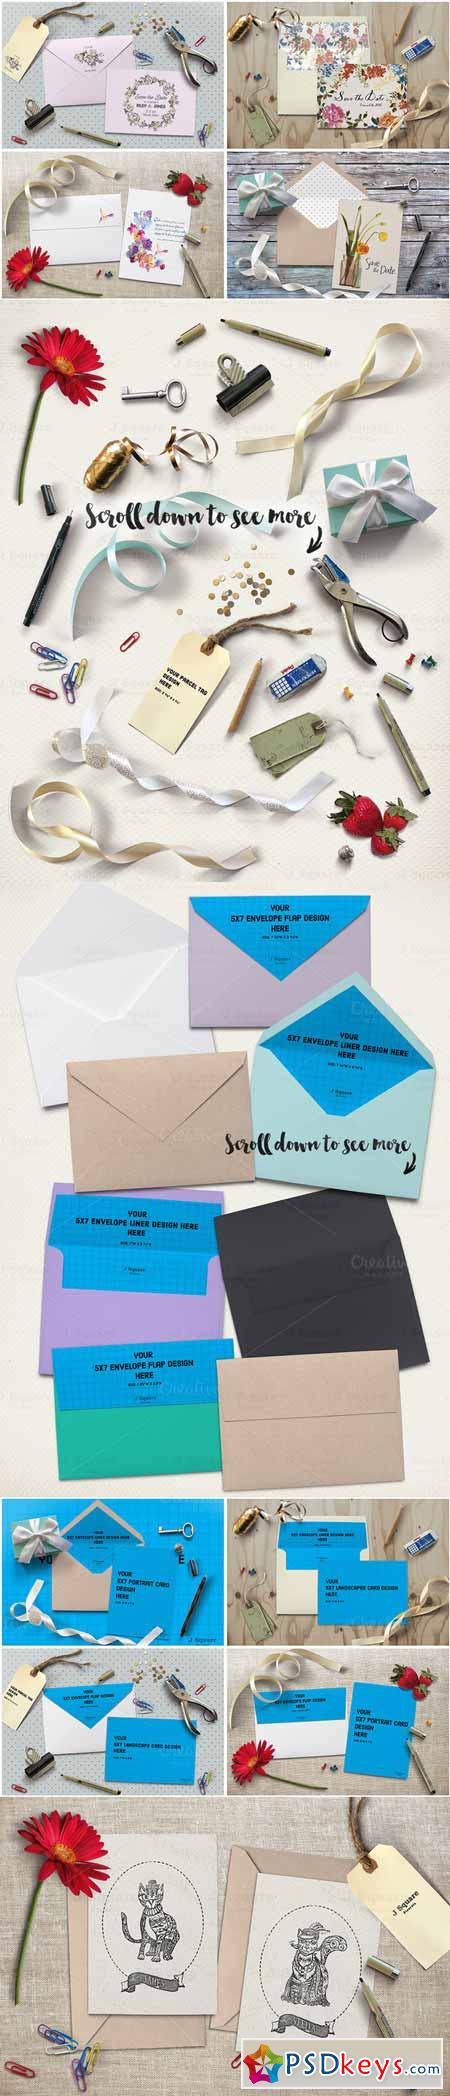 5x7 Card Envelope Objects Mock Up 2 222855